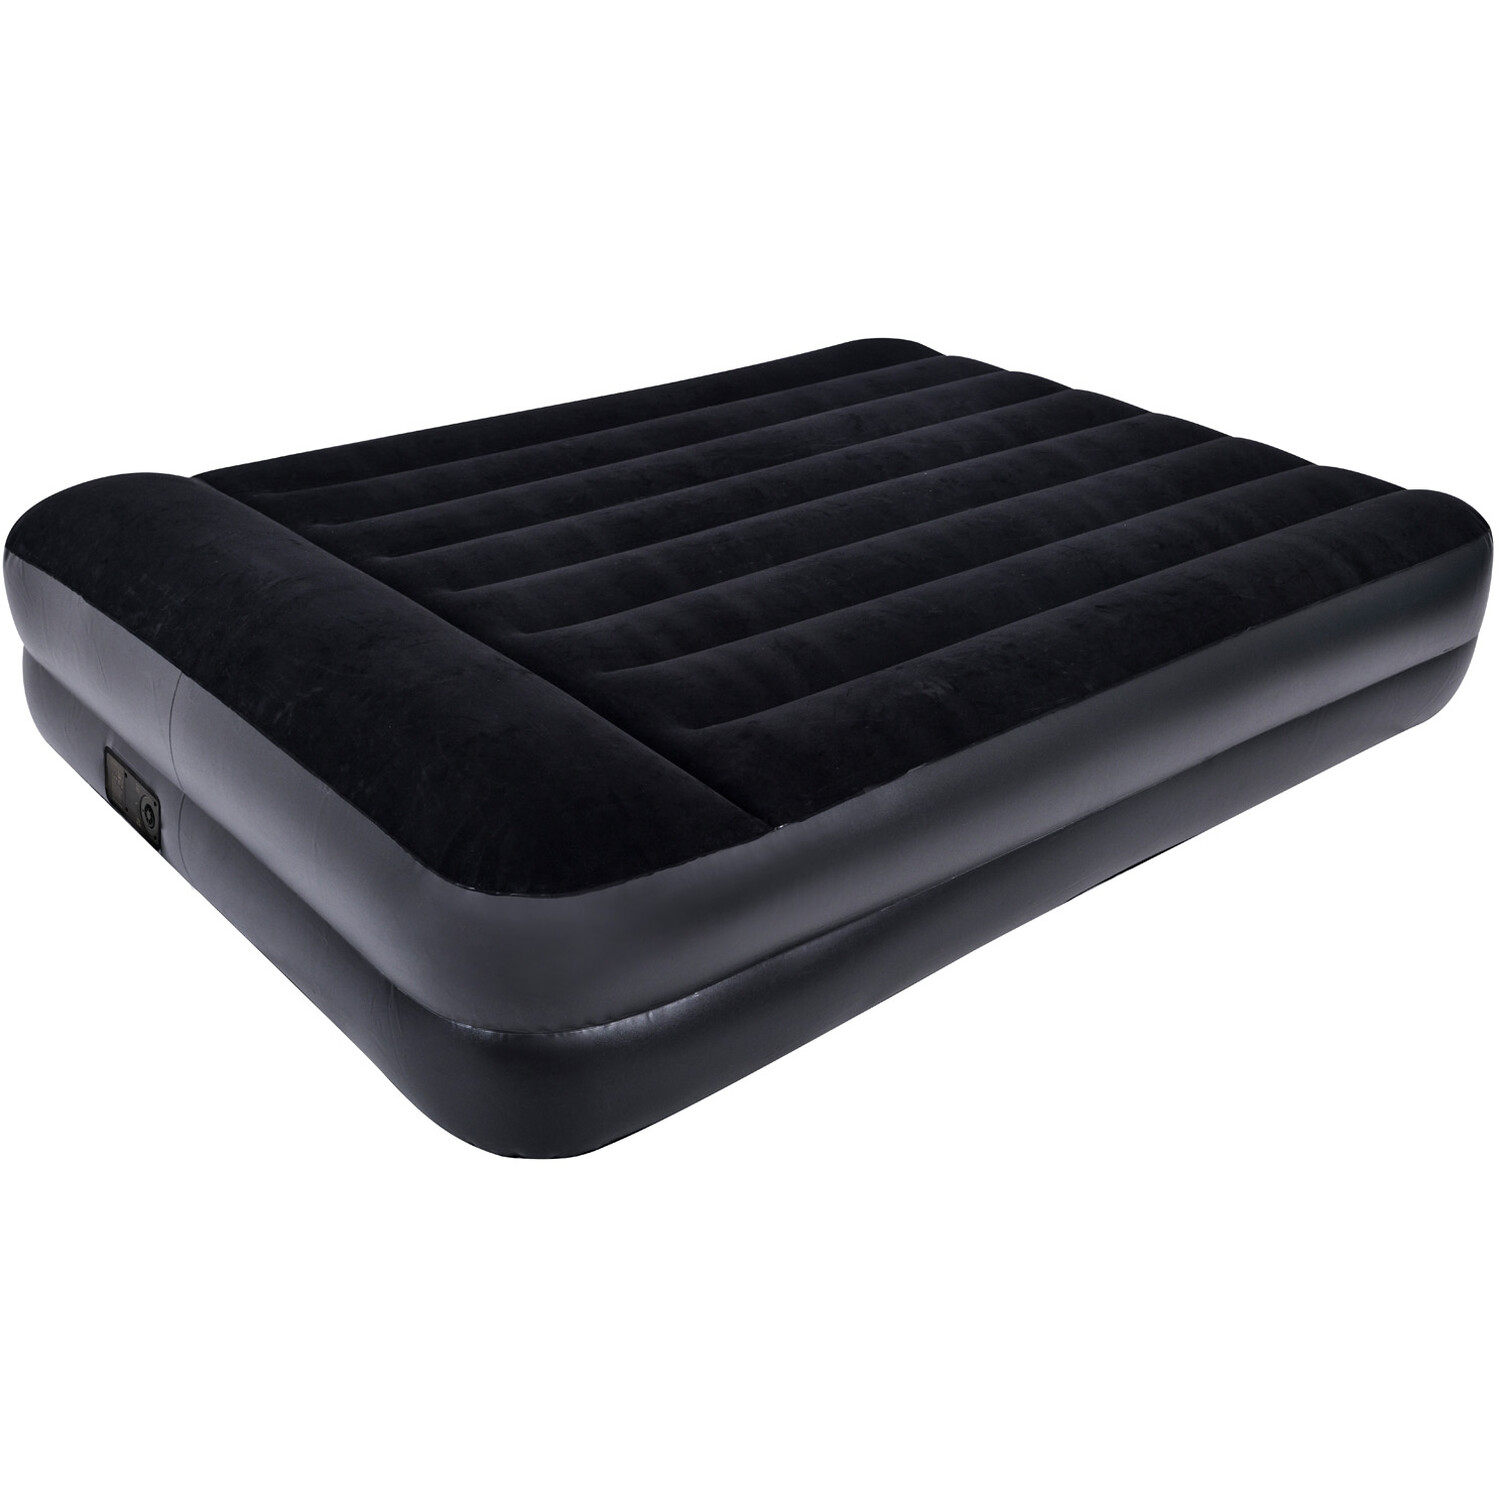 High Raised Queen Size Airbed with Pump Image 1